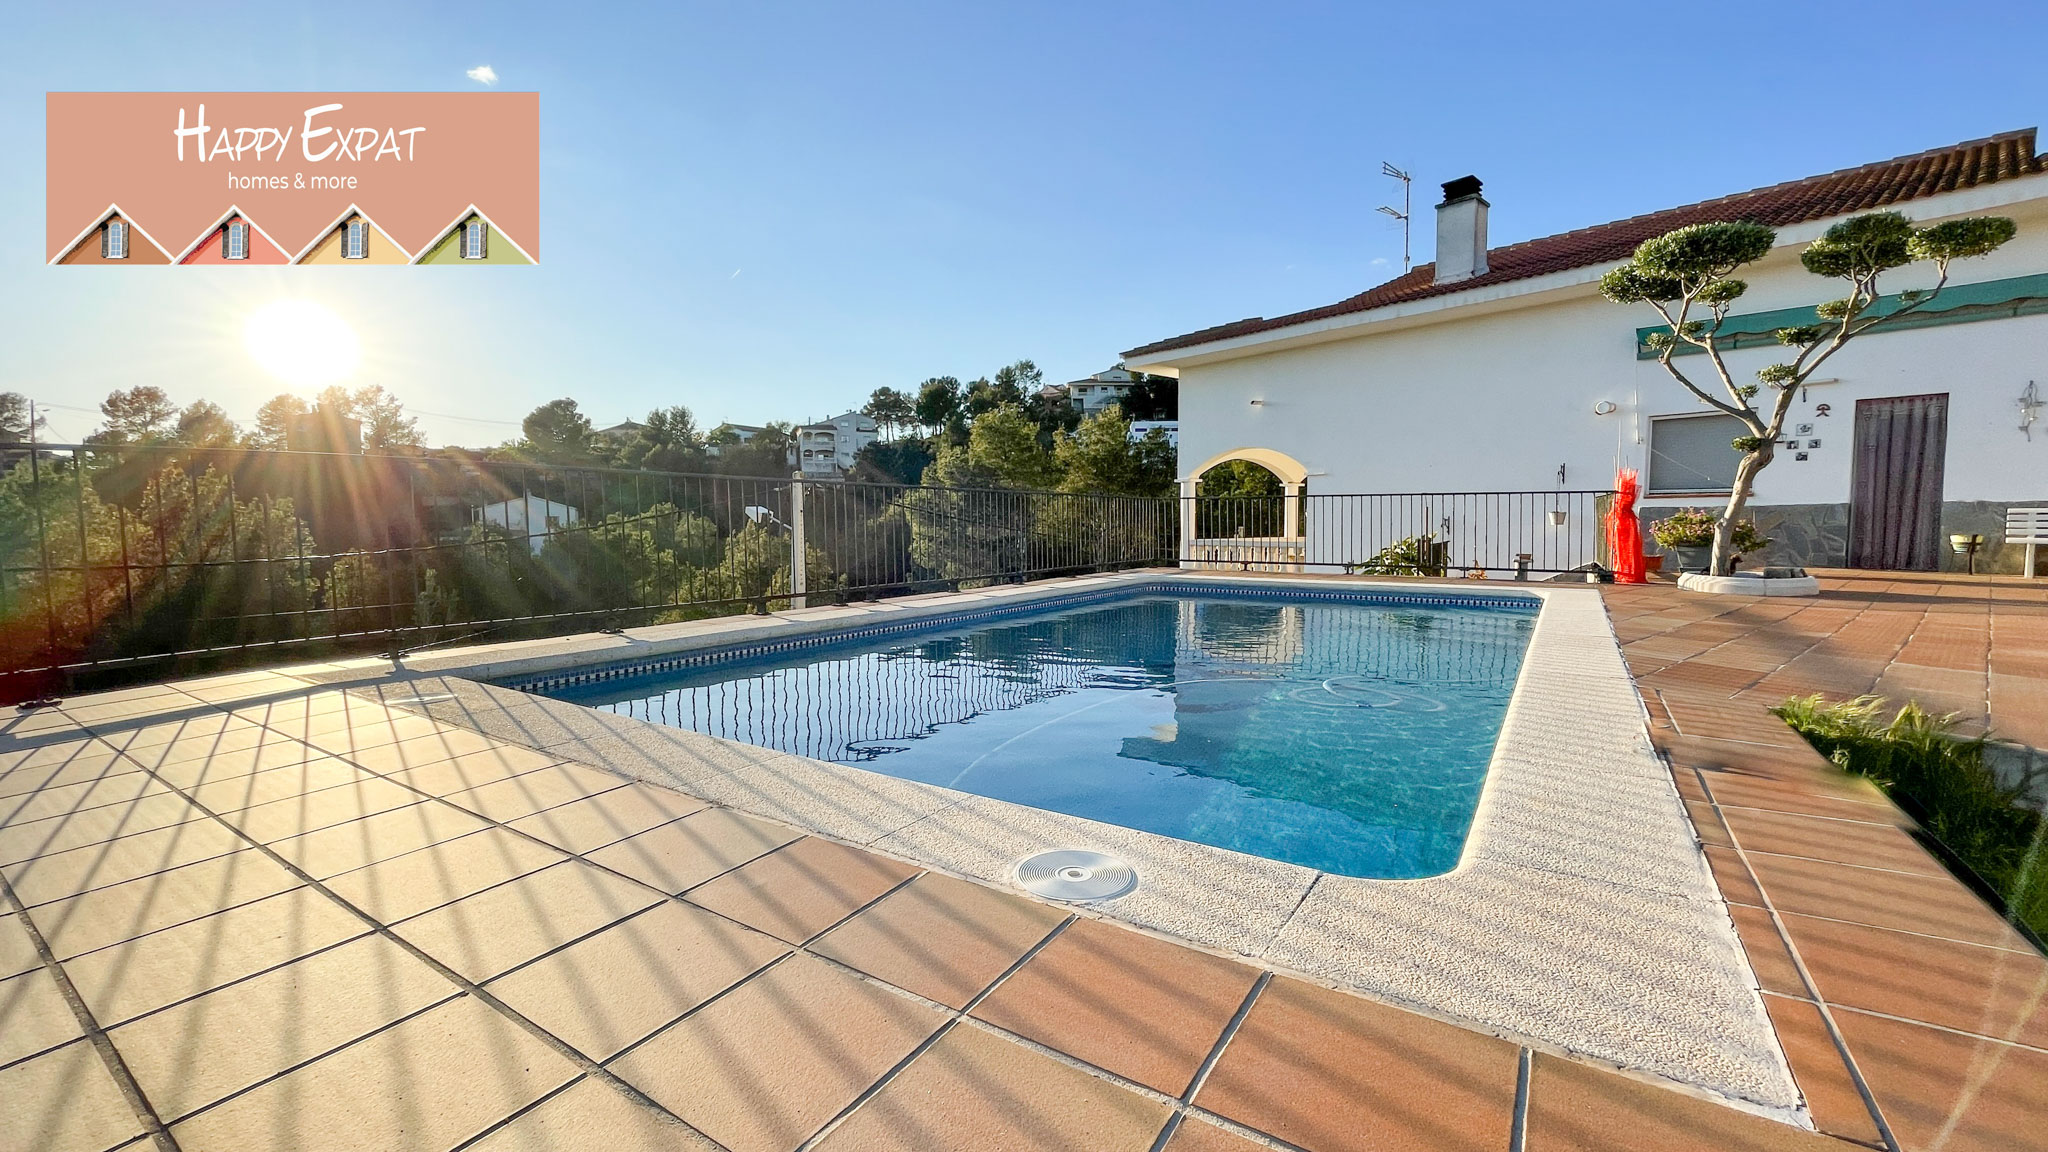 House in double plot, large pool, nice garden